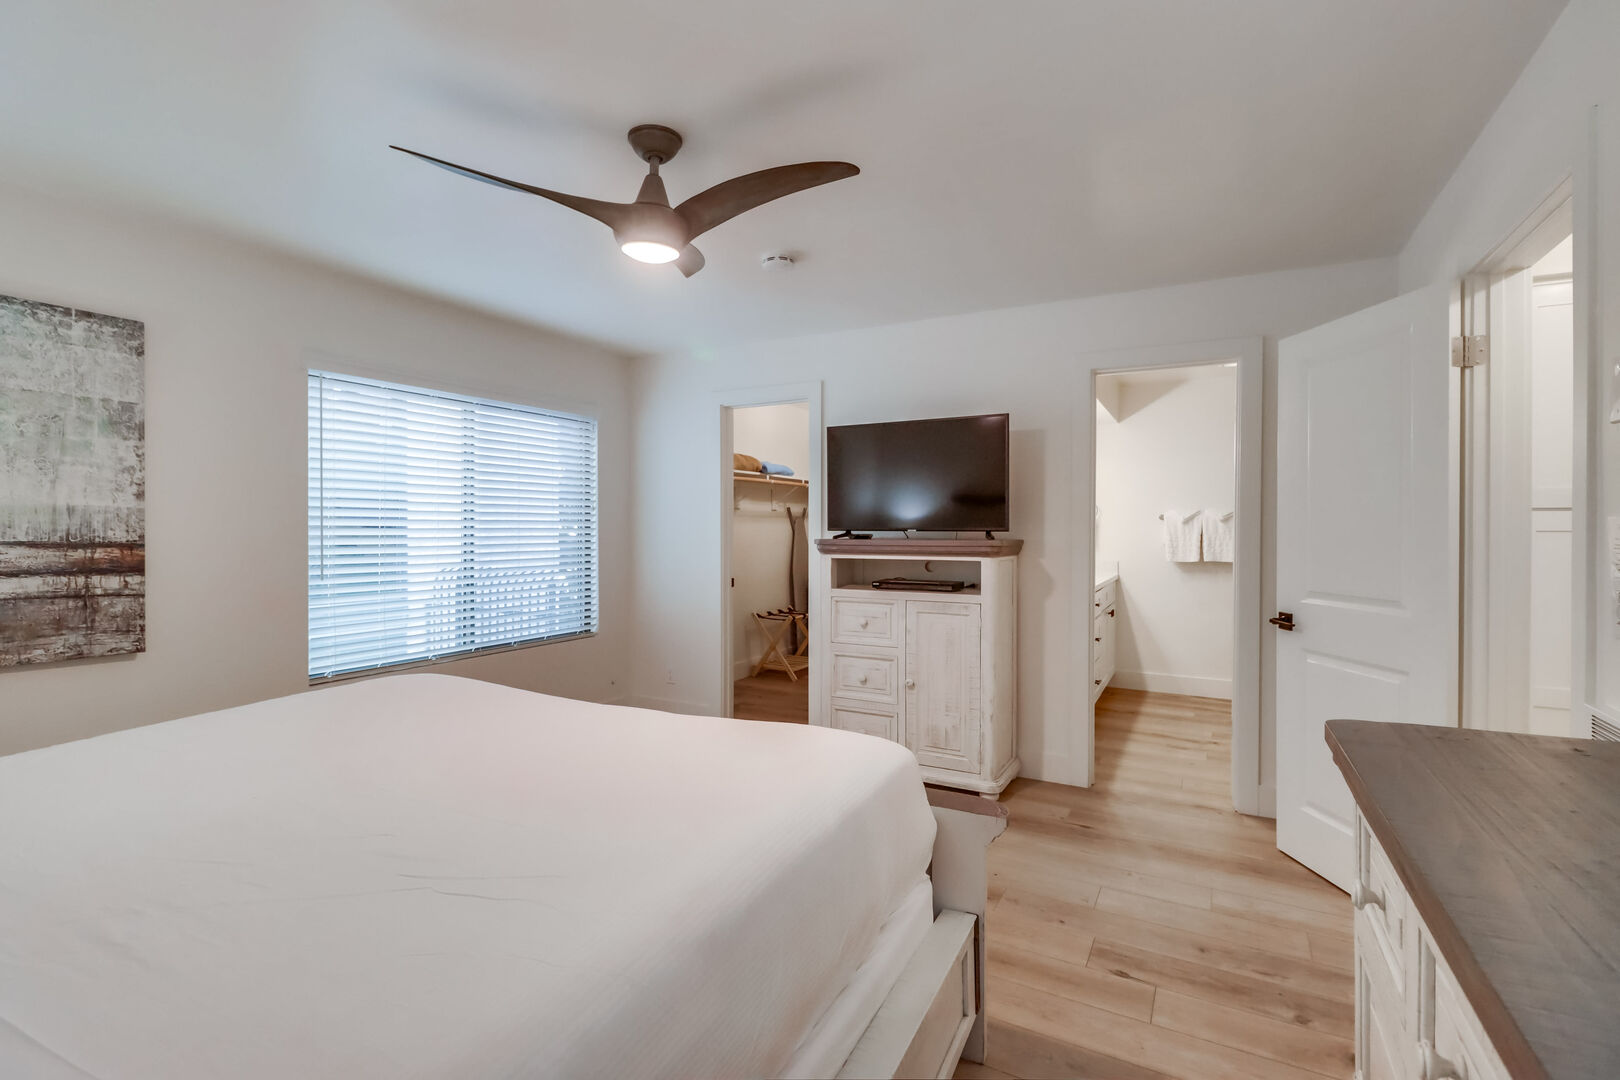 Master with king bed, ceiling fan, smart TV, walk-in closet, dresser and in-suite full bathroom